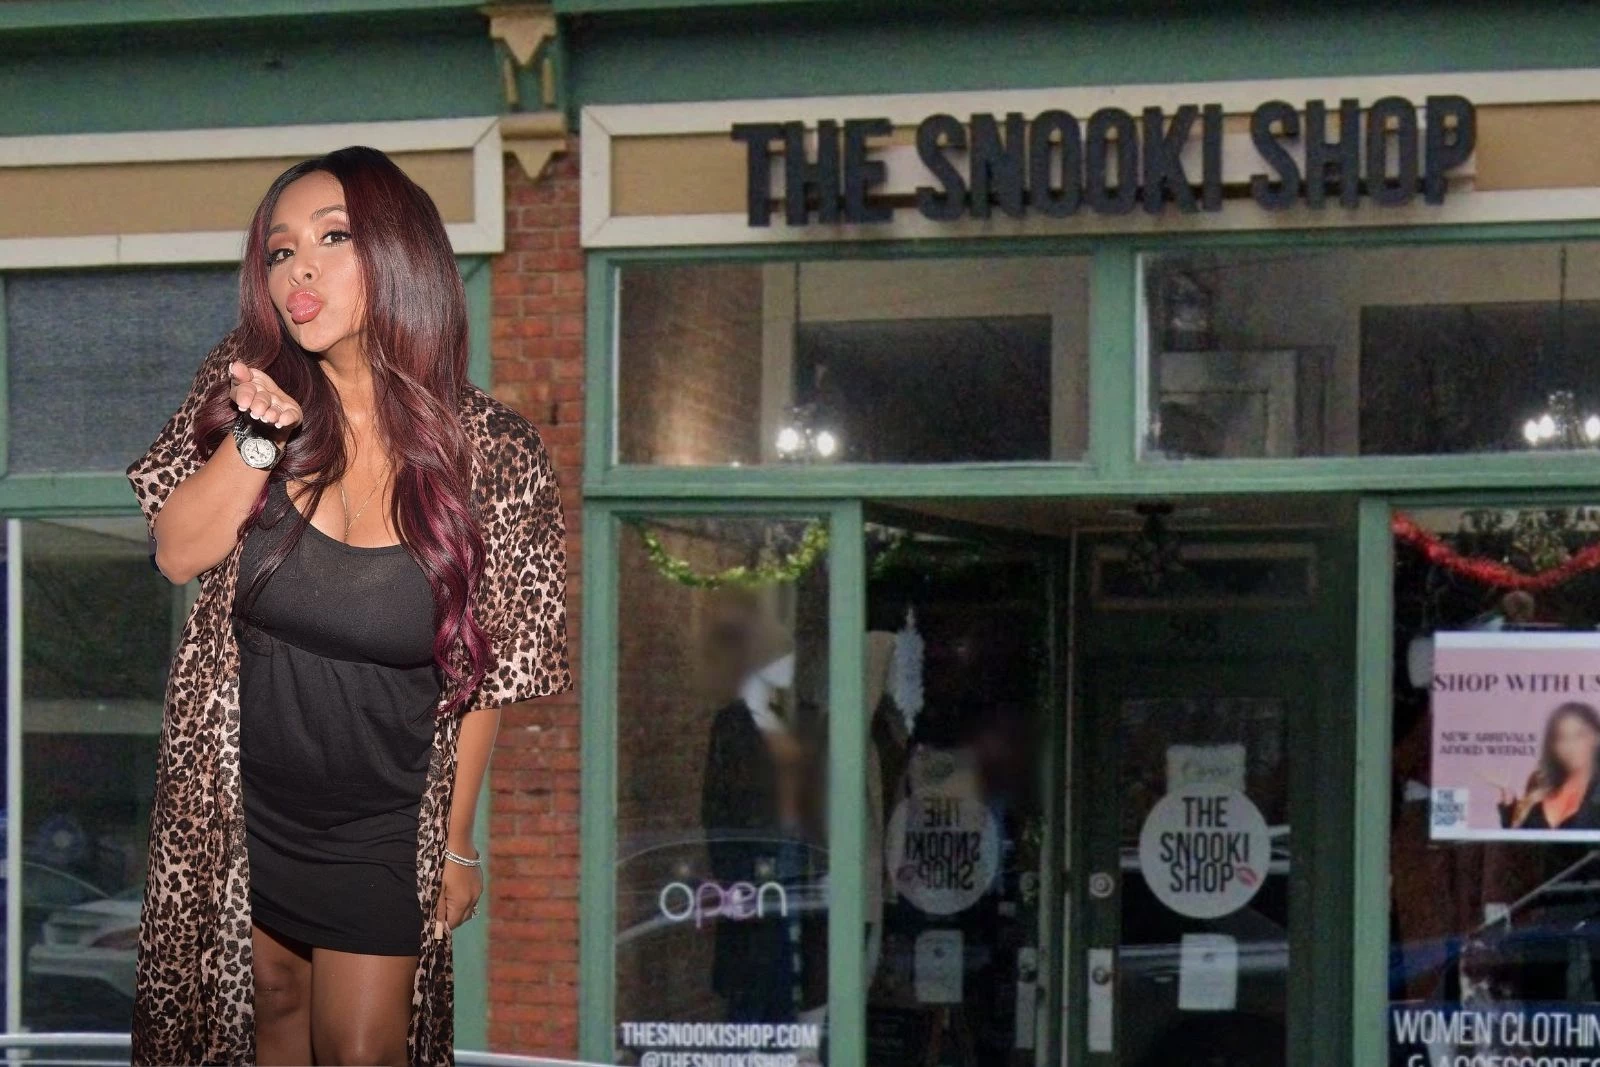 Snooki Teams Up With Cheez It For Celebrity Box Collaboration